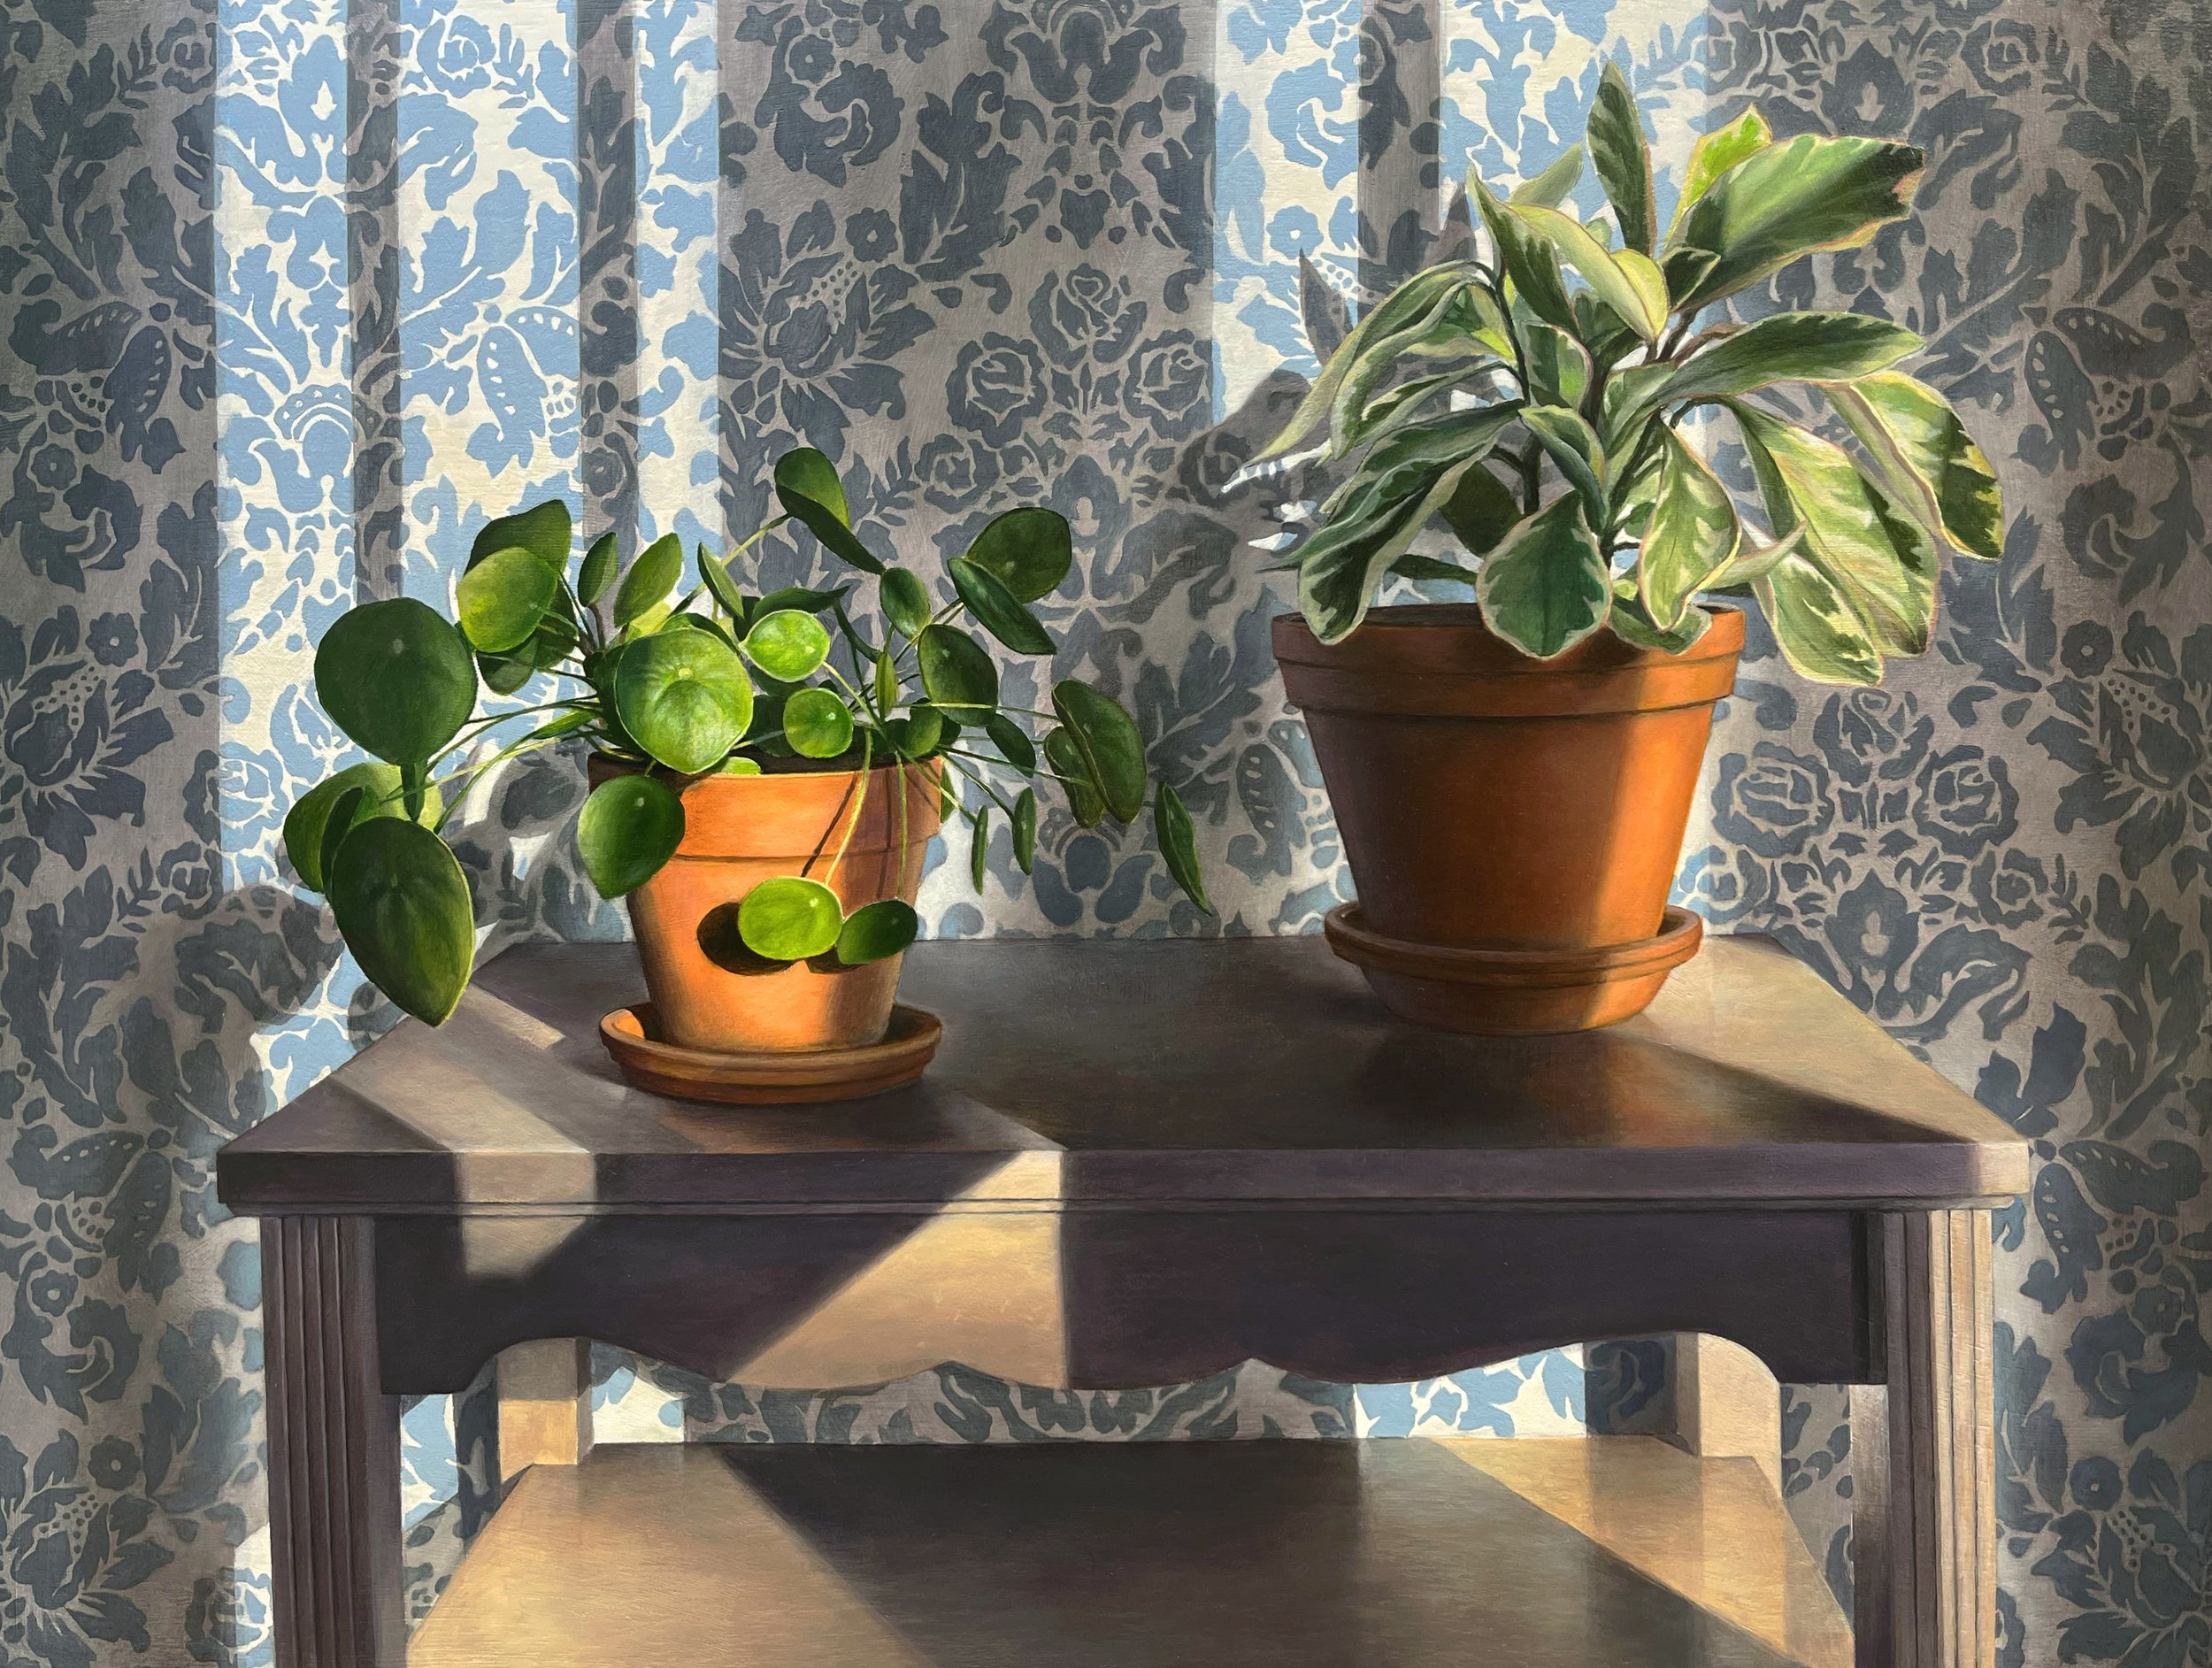   Two Houseplants in Window Light   2023  Oil on linen over panel  24 x 32 inches   